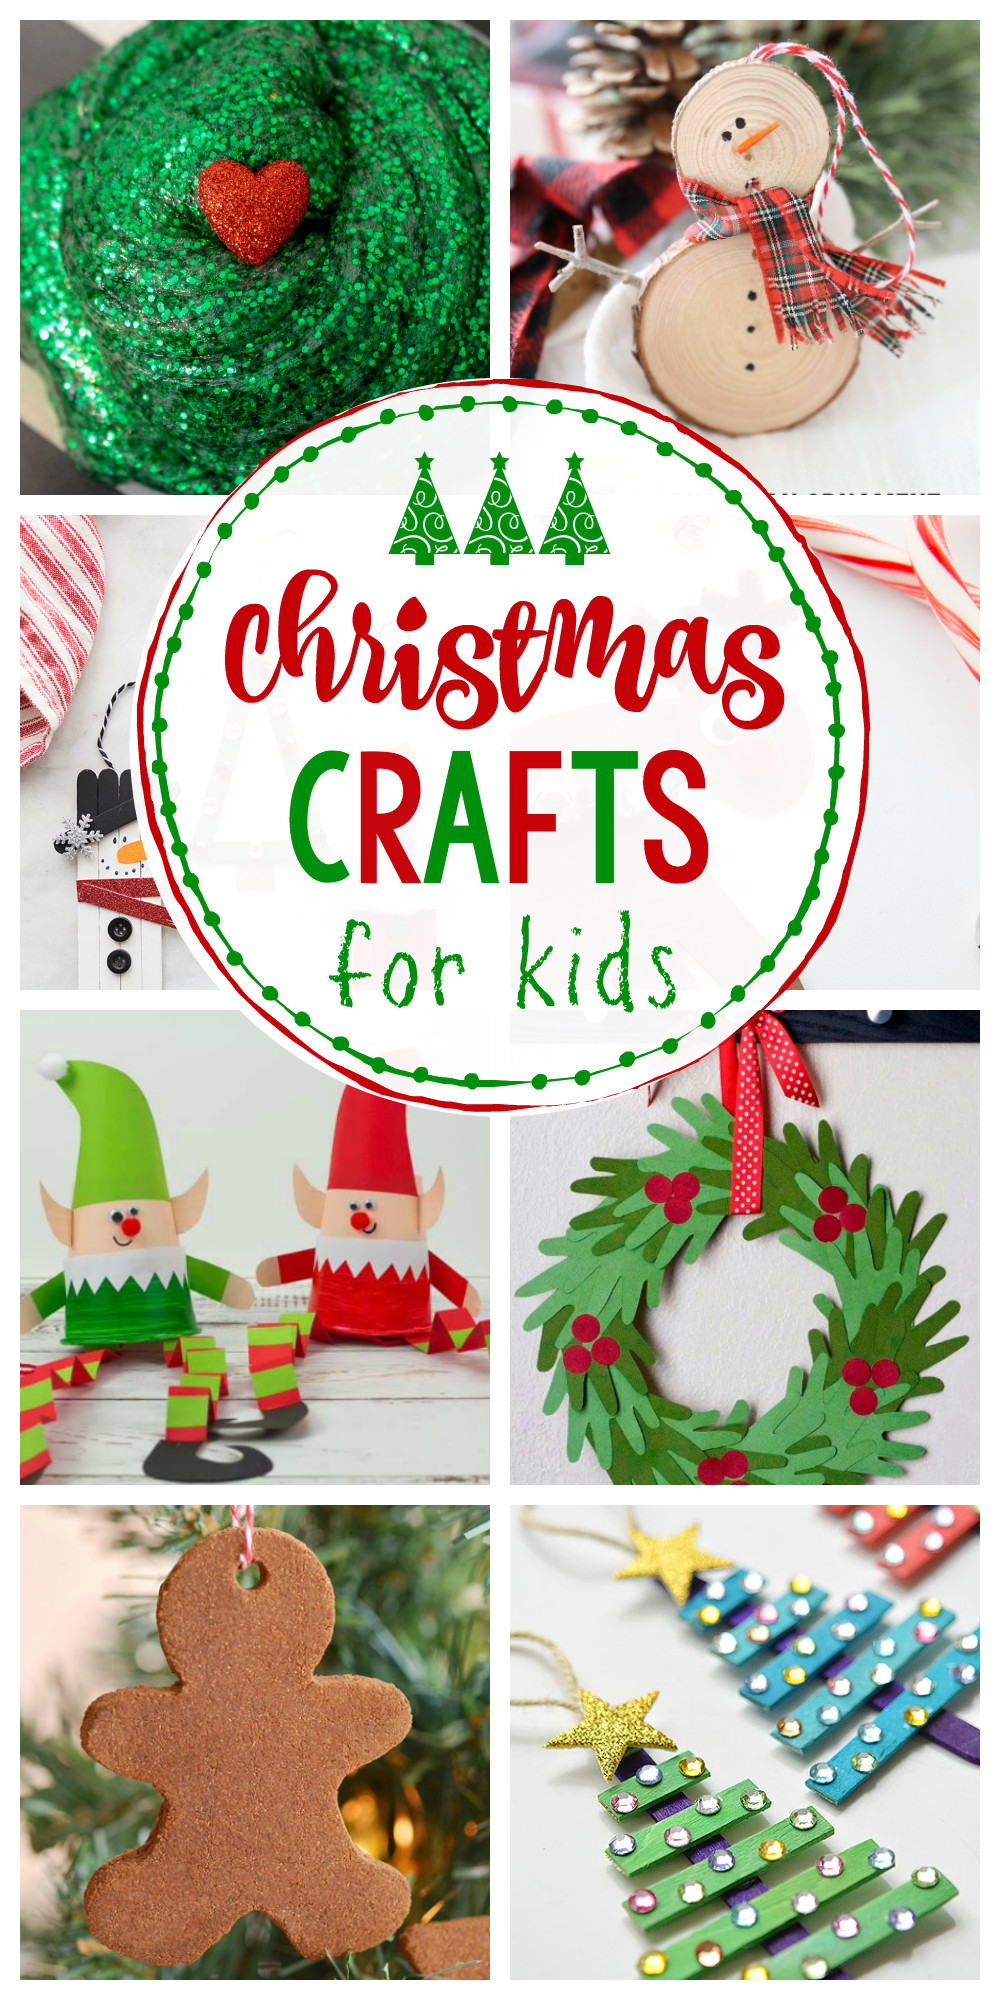 Crafts For Little Kids
 25 Easy Christmas Crafts for Kids Crazy Little Projects